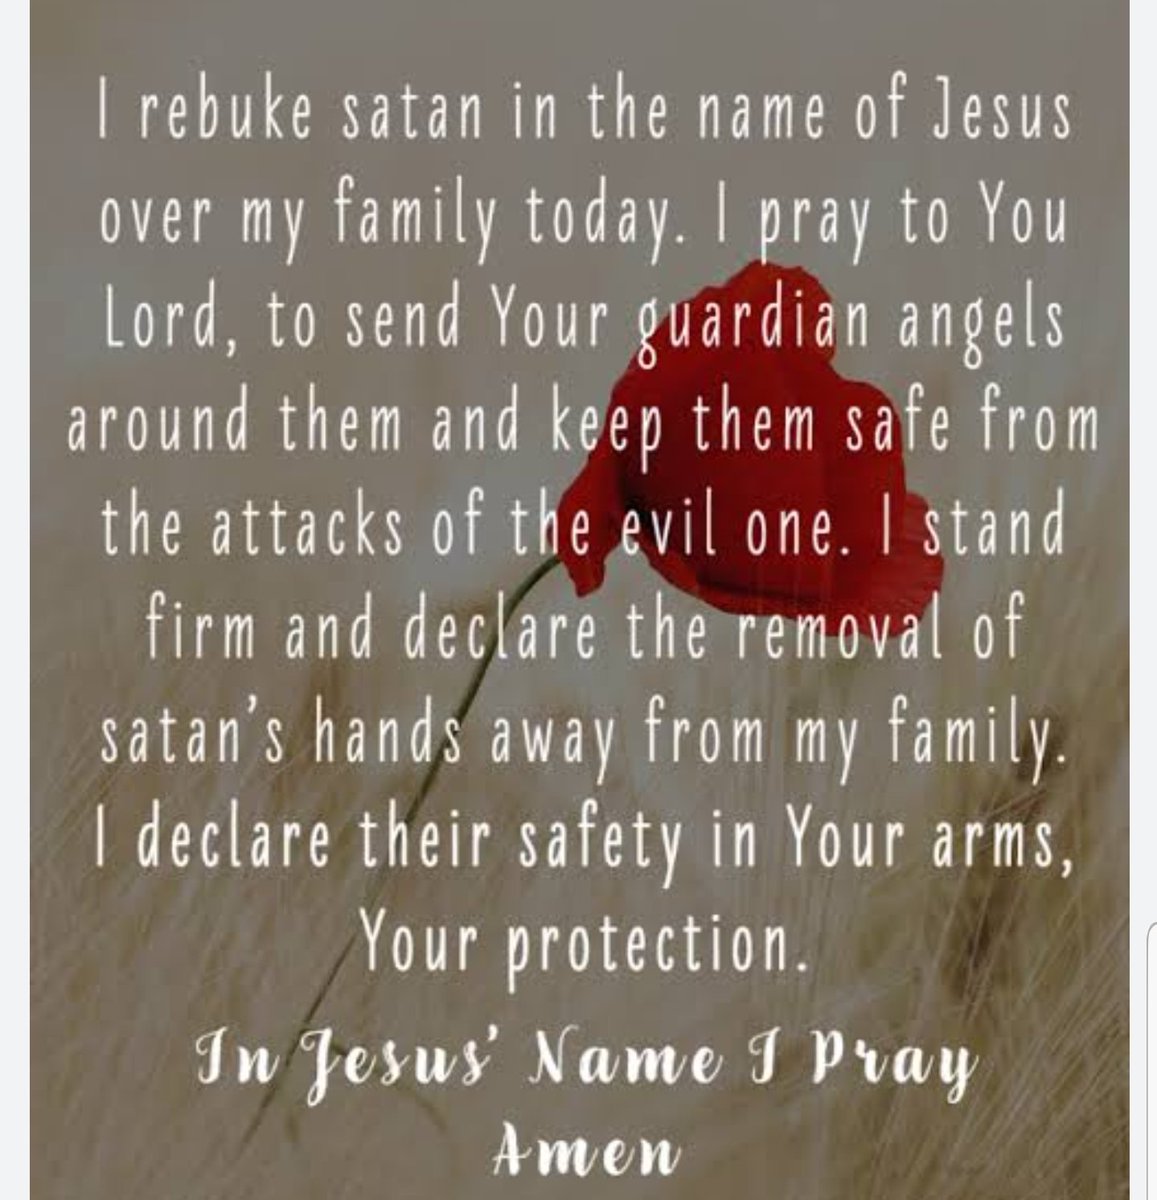 MY FATHER MY FATHER, IN THE NAME OF JESUS, AS I BEGIN TO PRAY, EVERY FORM OF SATANIC ORCHESTRATION OF DEATH AROUND ME AND MY FAMILY, IN THE NAME OF JESUS, WE ARE EXEMPTED... 
#WondersWithoutNumber